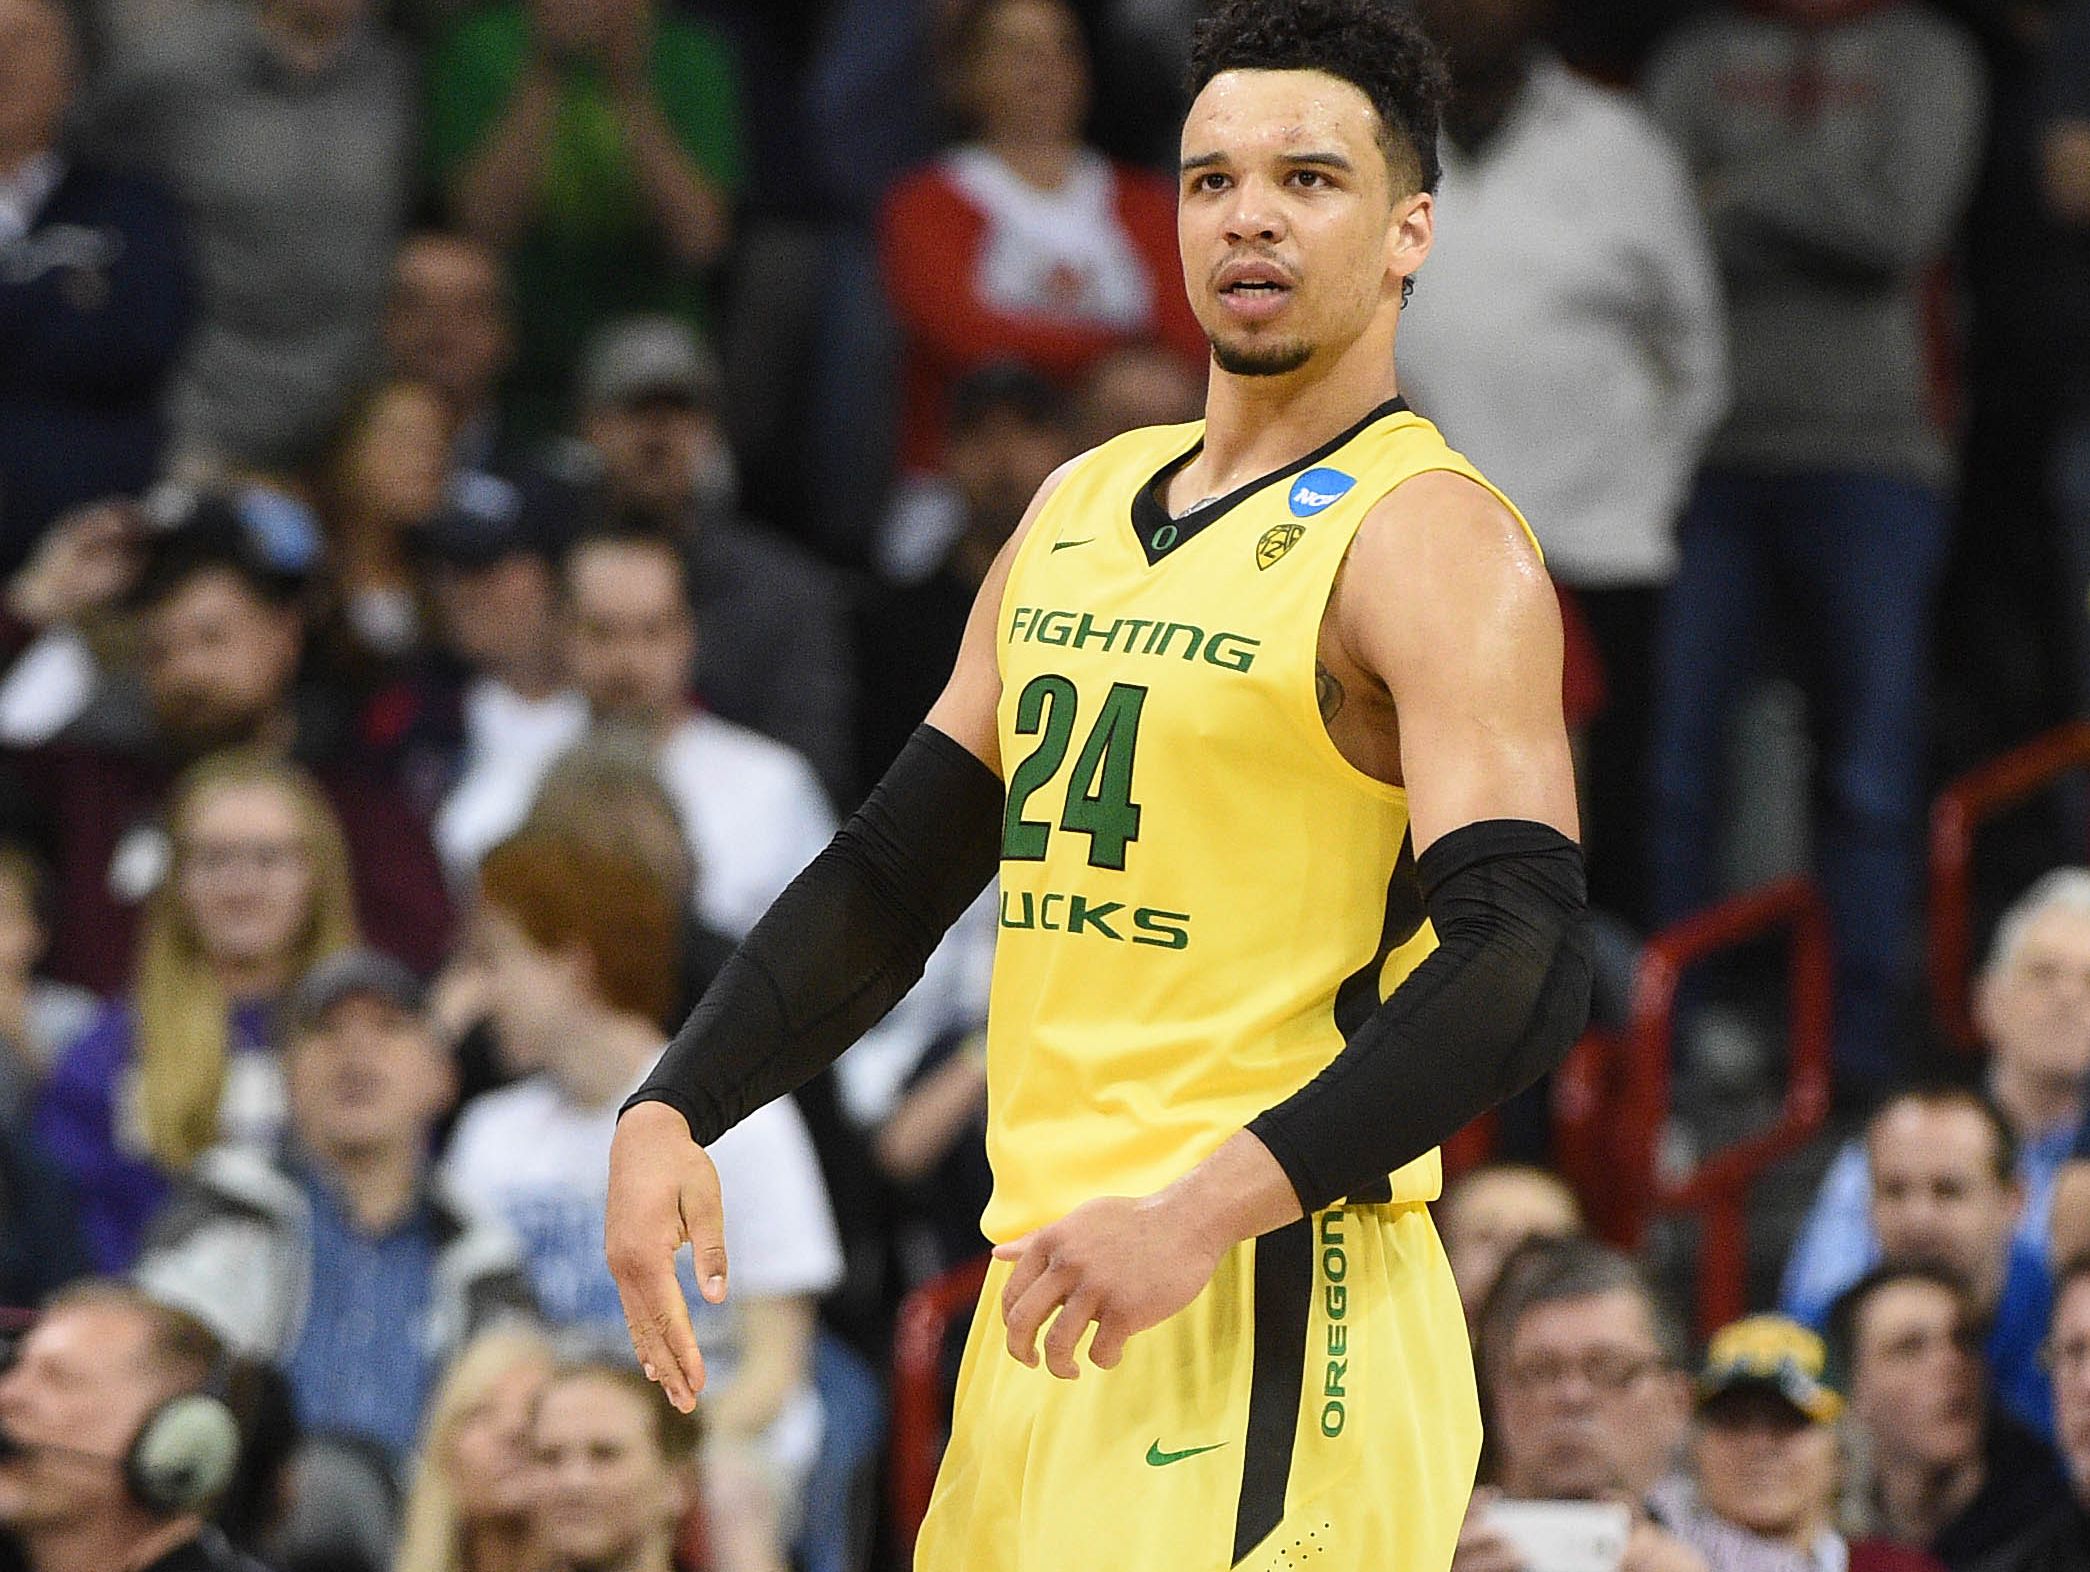 ‘Infectious’ Dillon Brooks plans to keep ‘fire’ with Final Four hopes